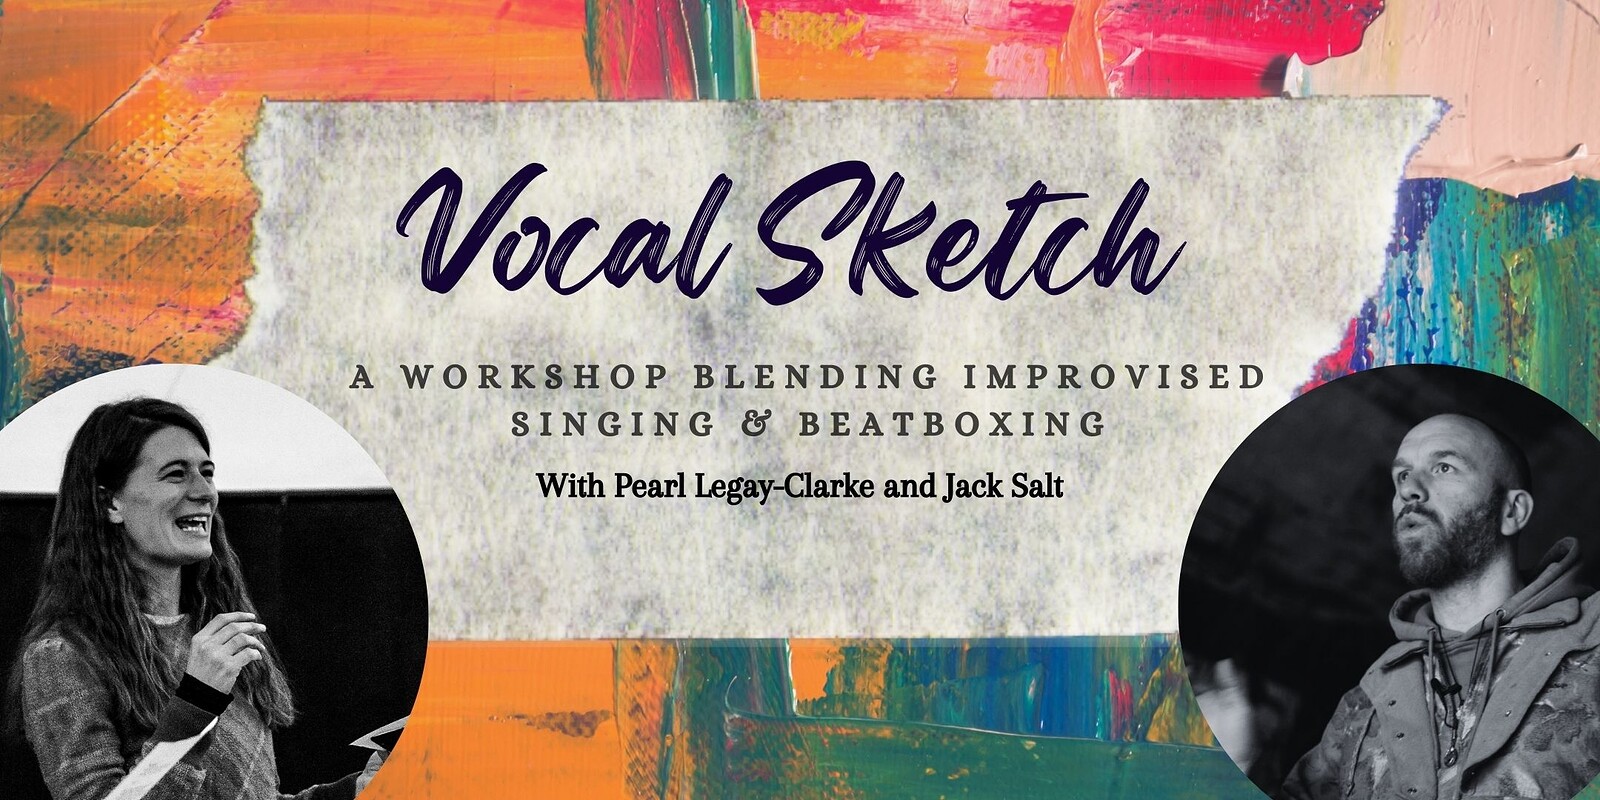 Vocal Sketch at The Pickle Factory